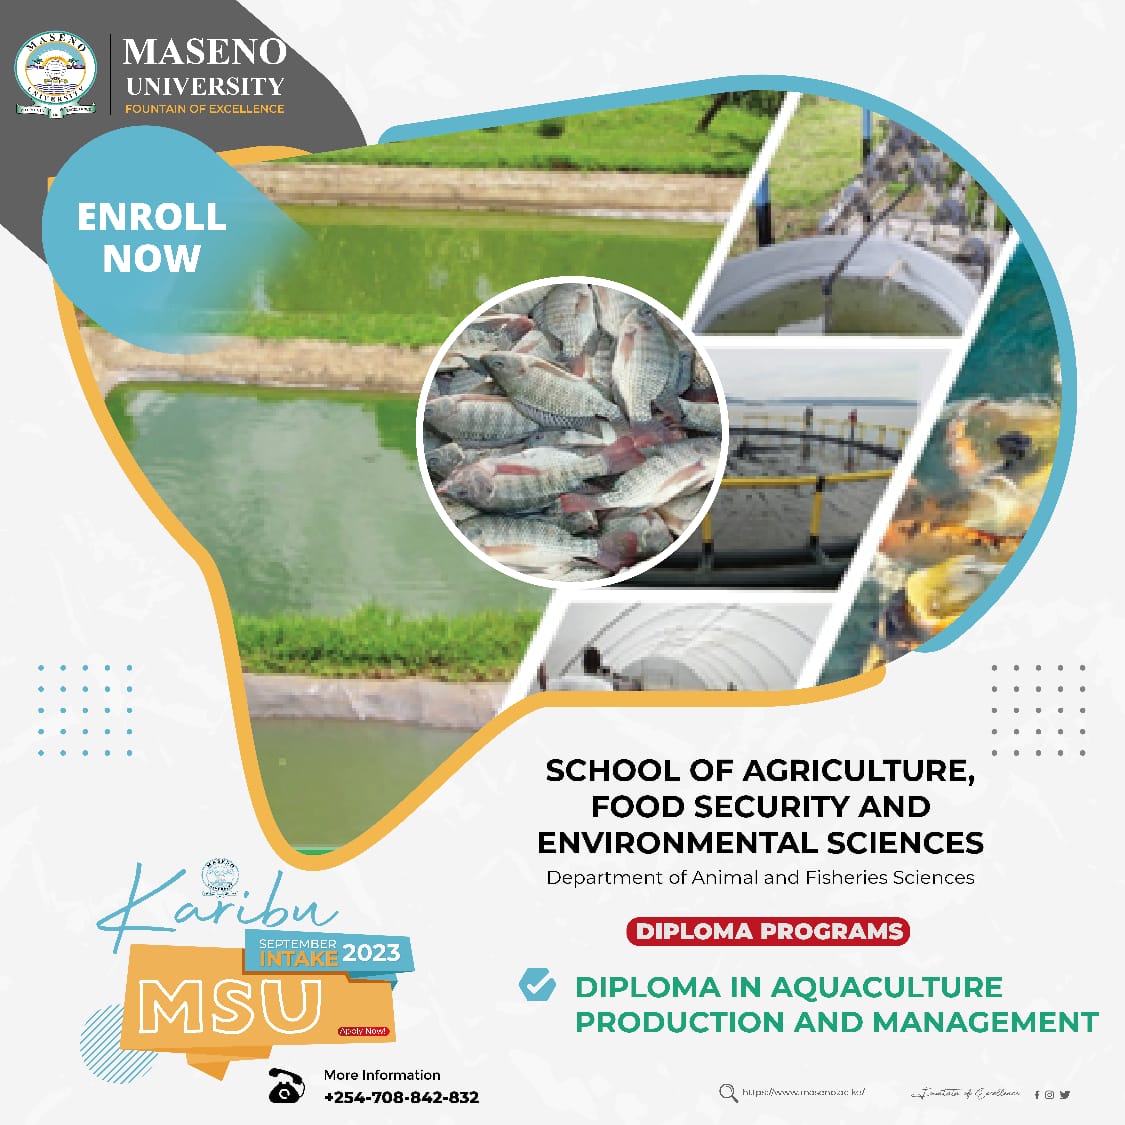 School of Agriculture Food Security and Environmental Science Department of Animal and Fisheries Sciences DIPLOMA IN AQUACULTURE PRODUCTION AND MANAGEMENT maseno.ac.ke/application-fo… safs.maseno.ac.ke/home-5 maseno.ac.ke